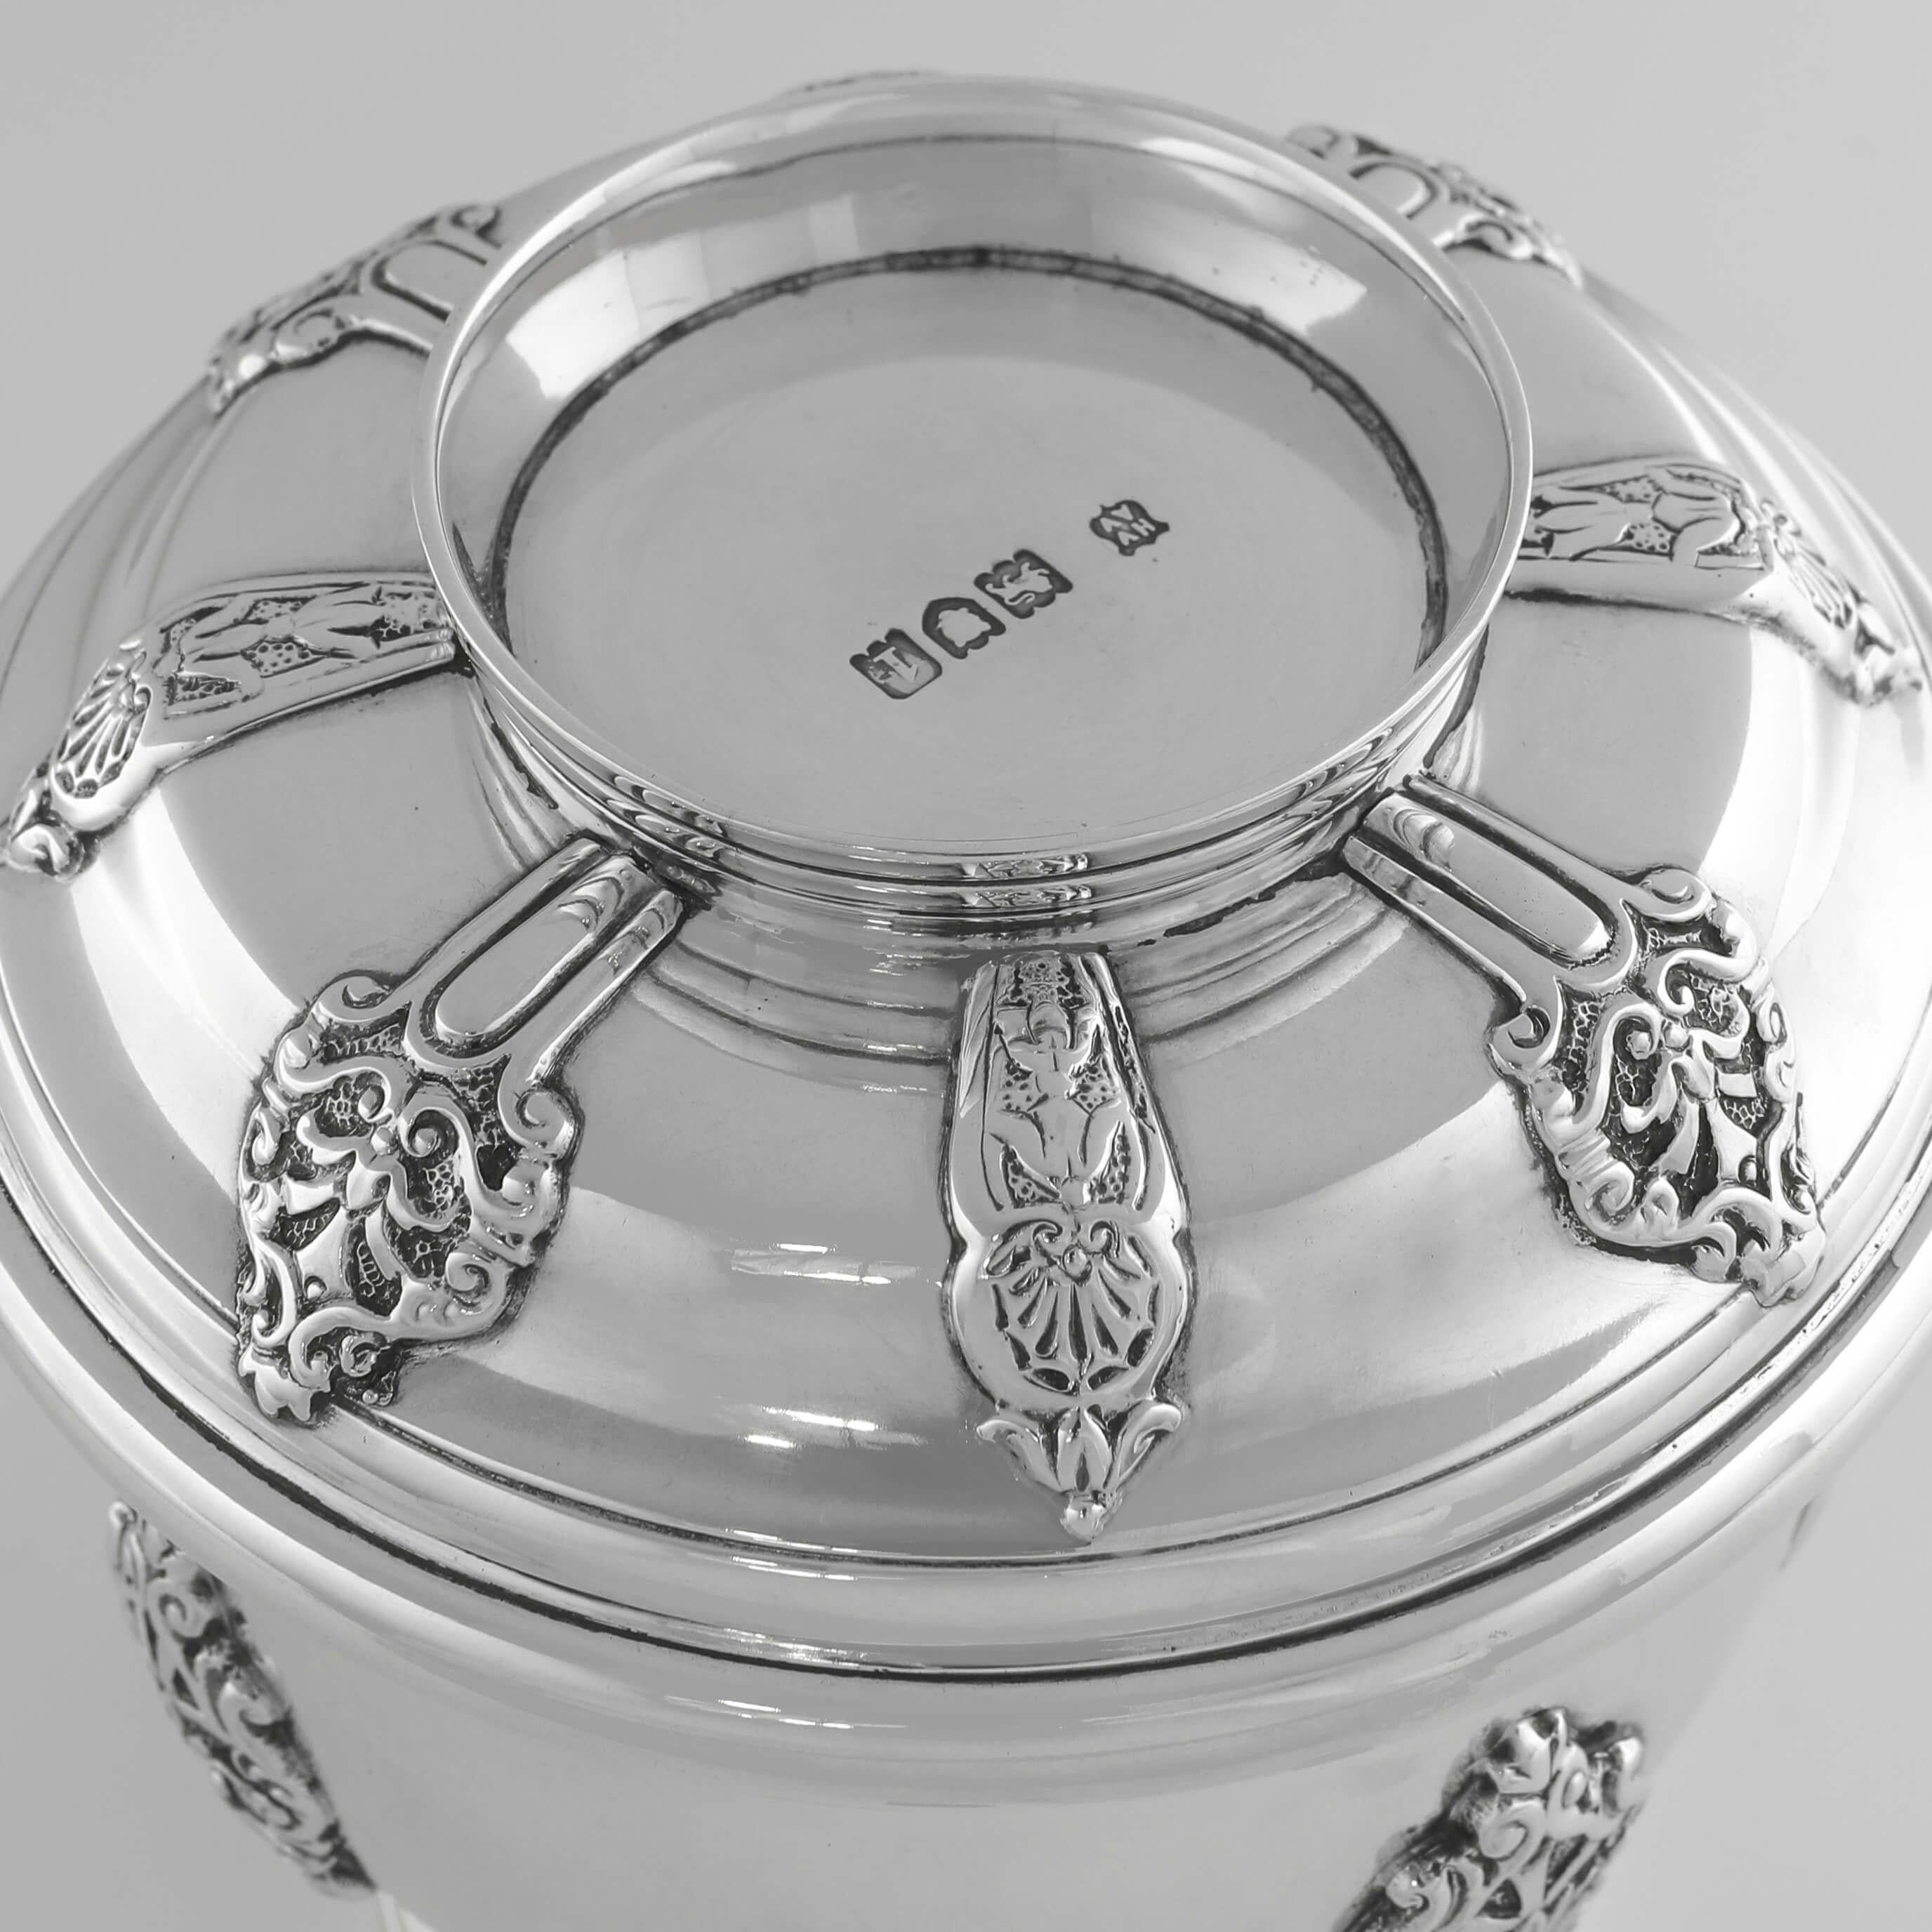 English Antique Sterling Silver Sugar Bowl With Lid - Vanders 1906 - George II Design For Sale